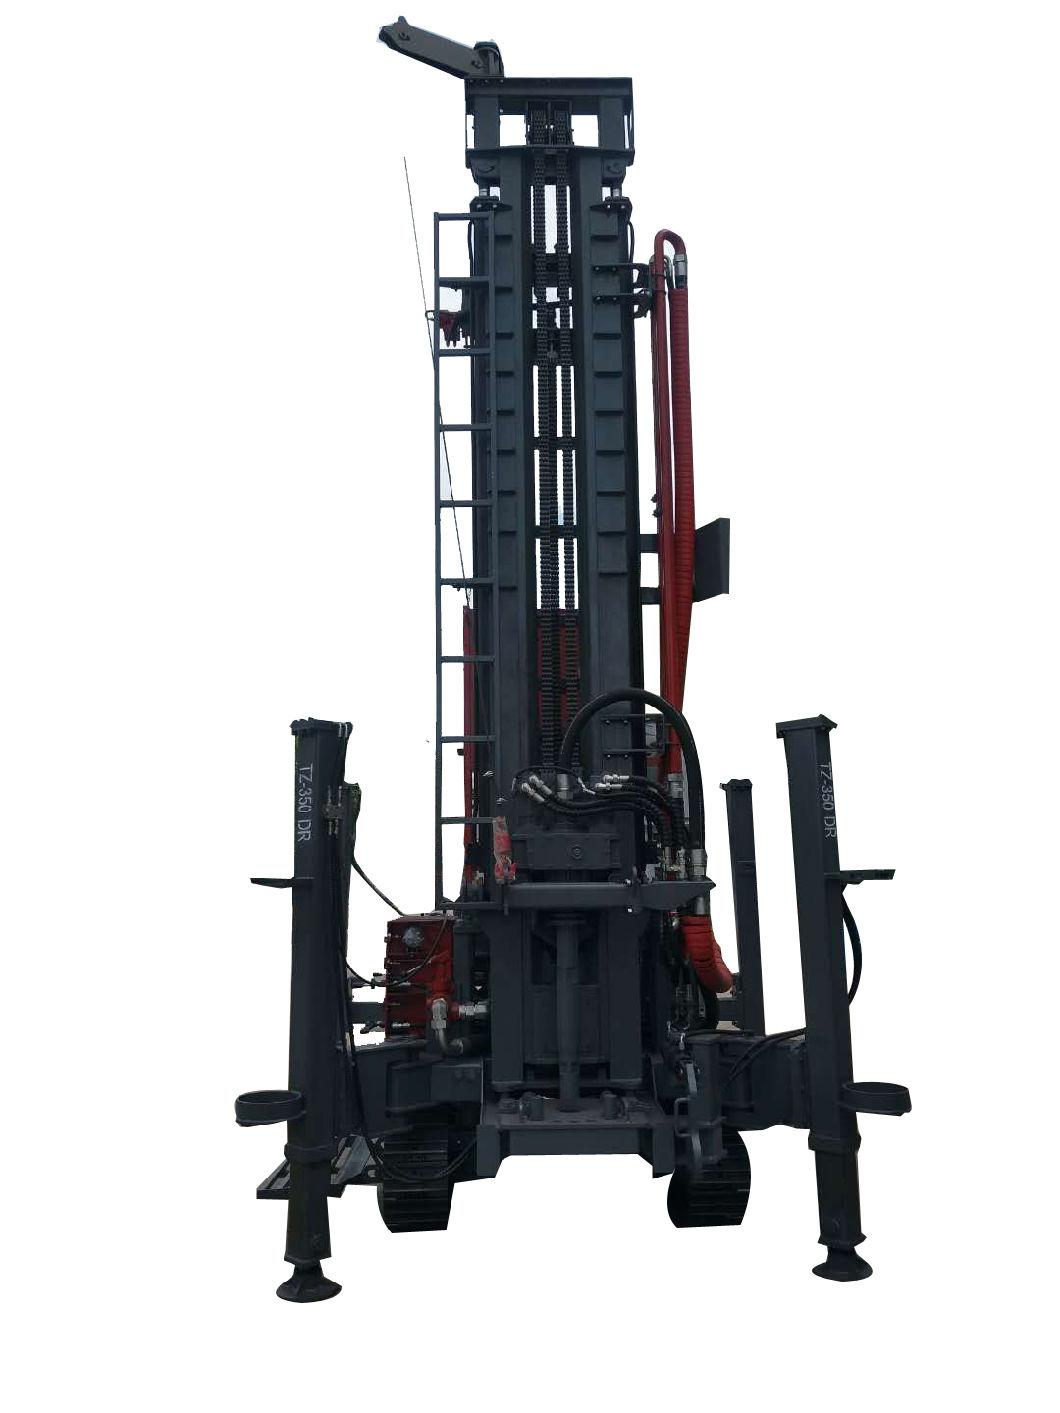 500m Water Well Drilling Rig with Compressor